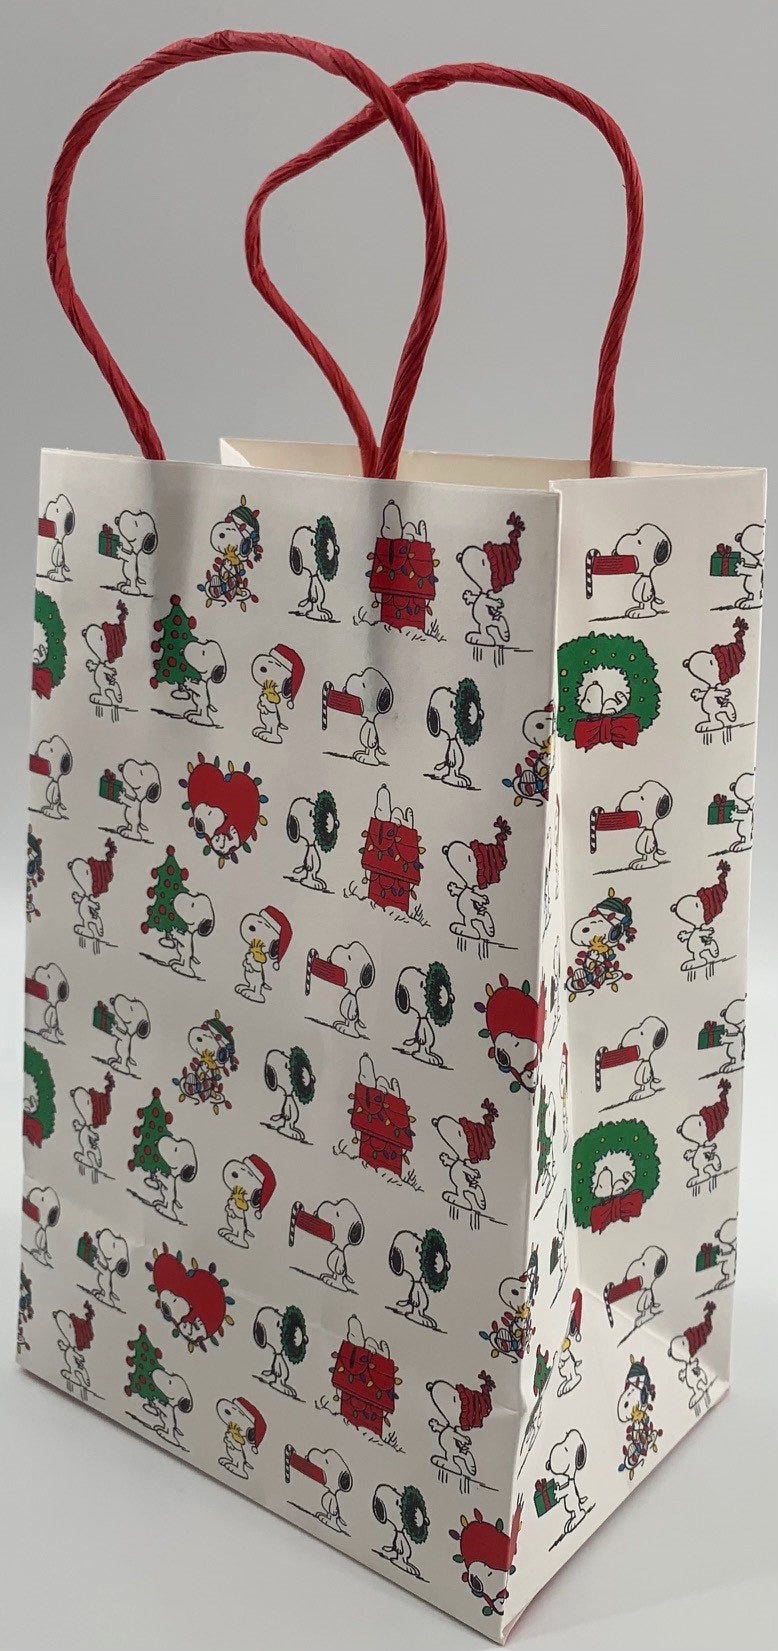 Peanuts - Snoopy Christmas Fun Small Paper Gift Bags (Set of 2)